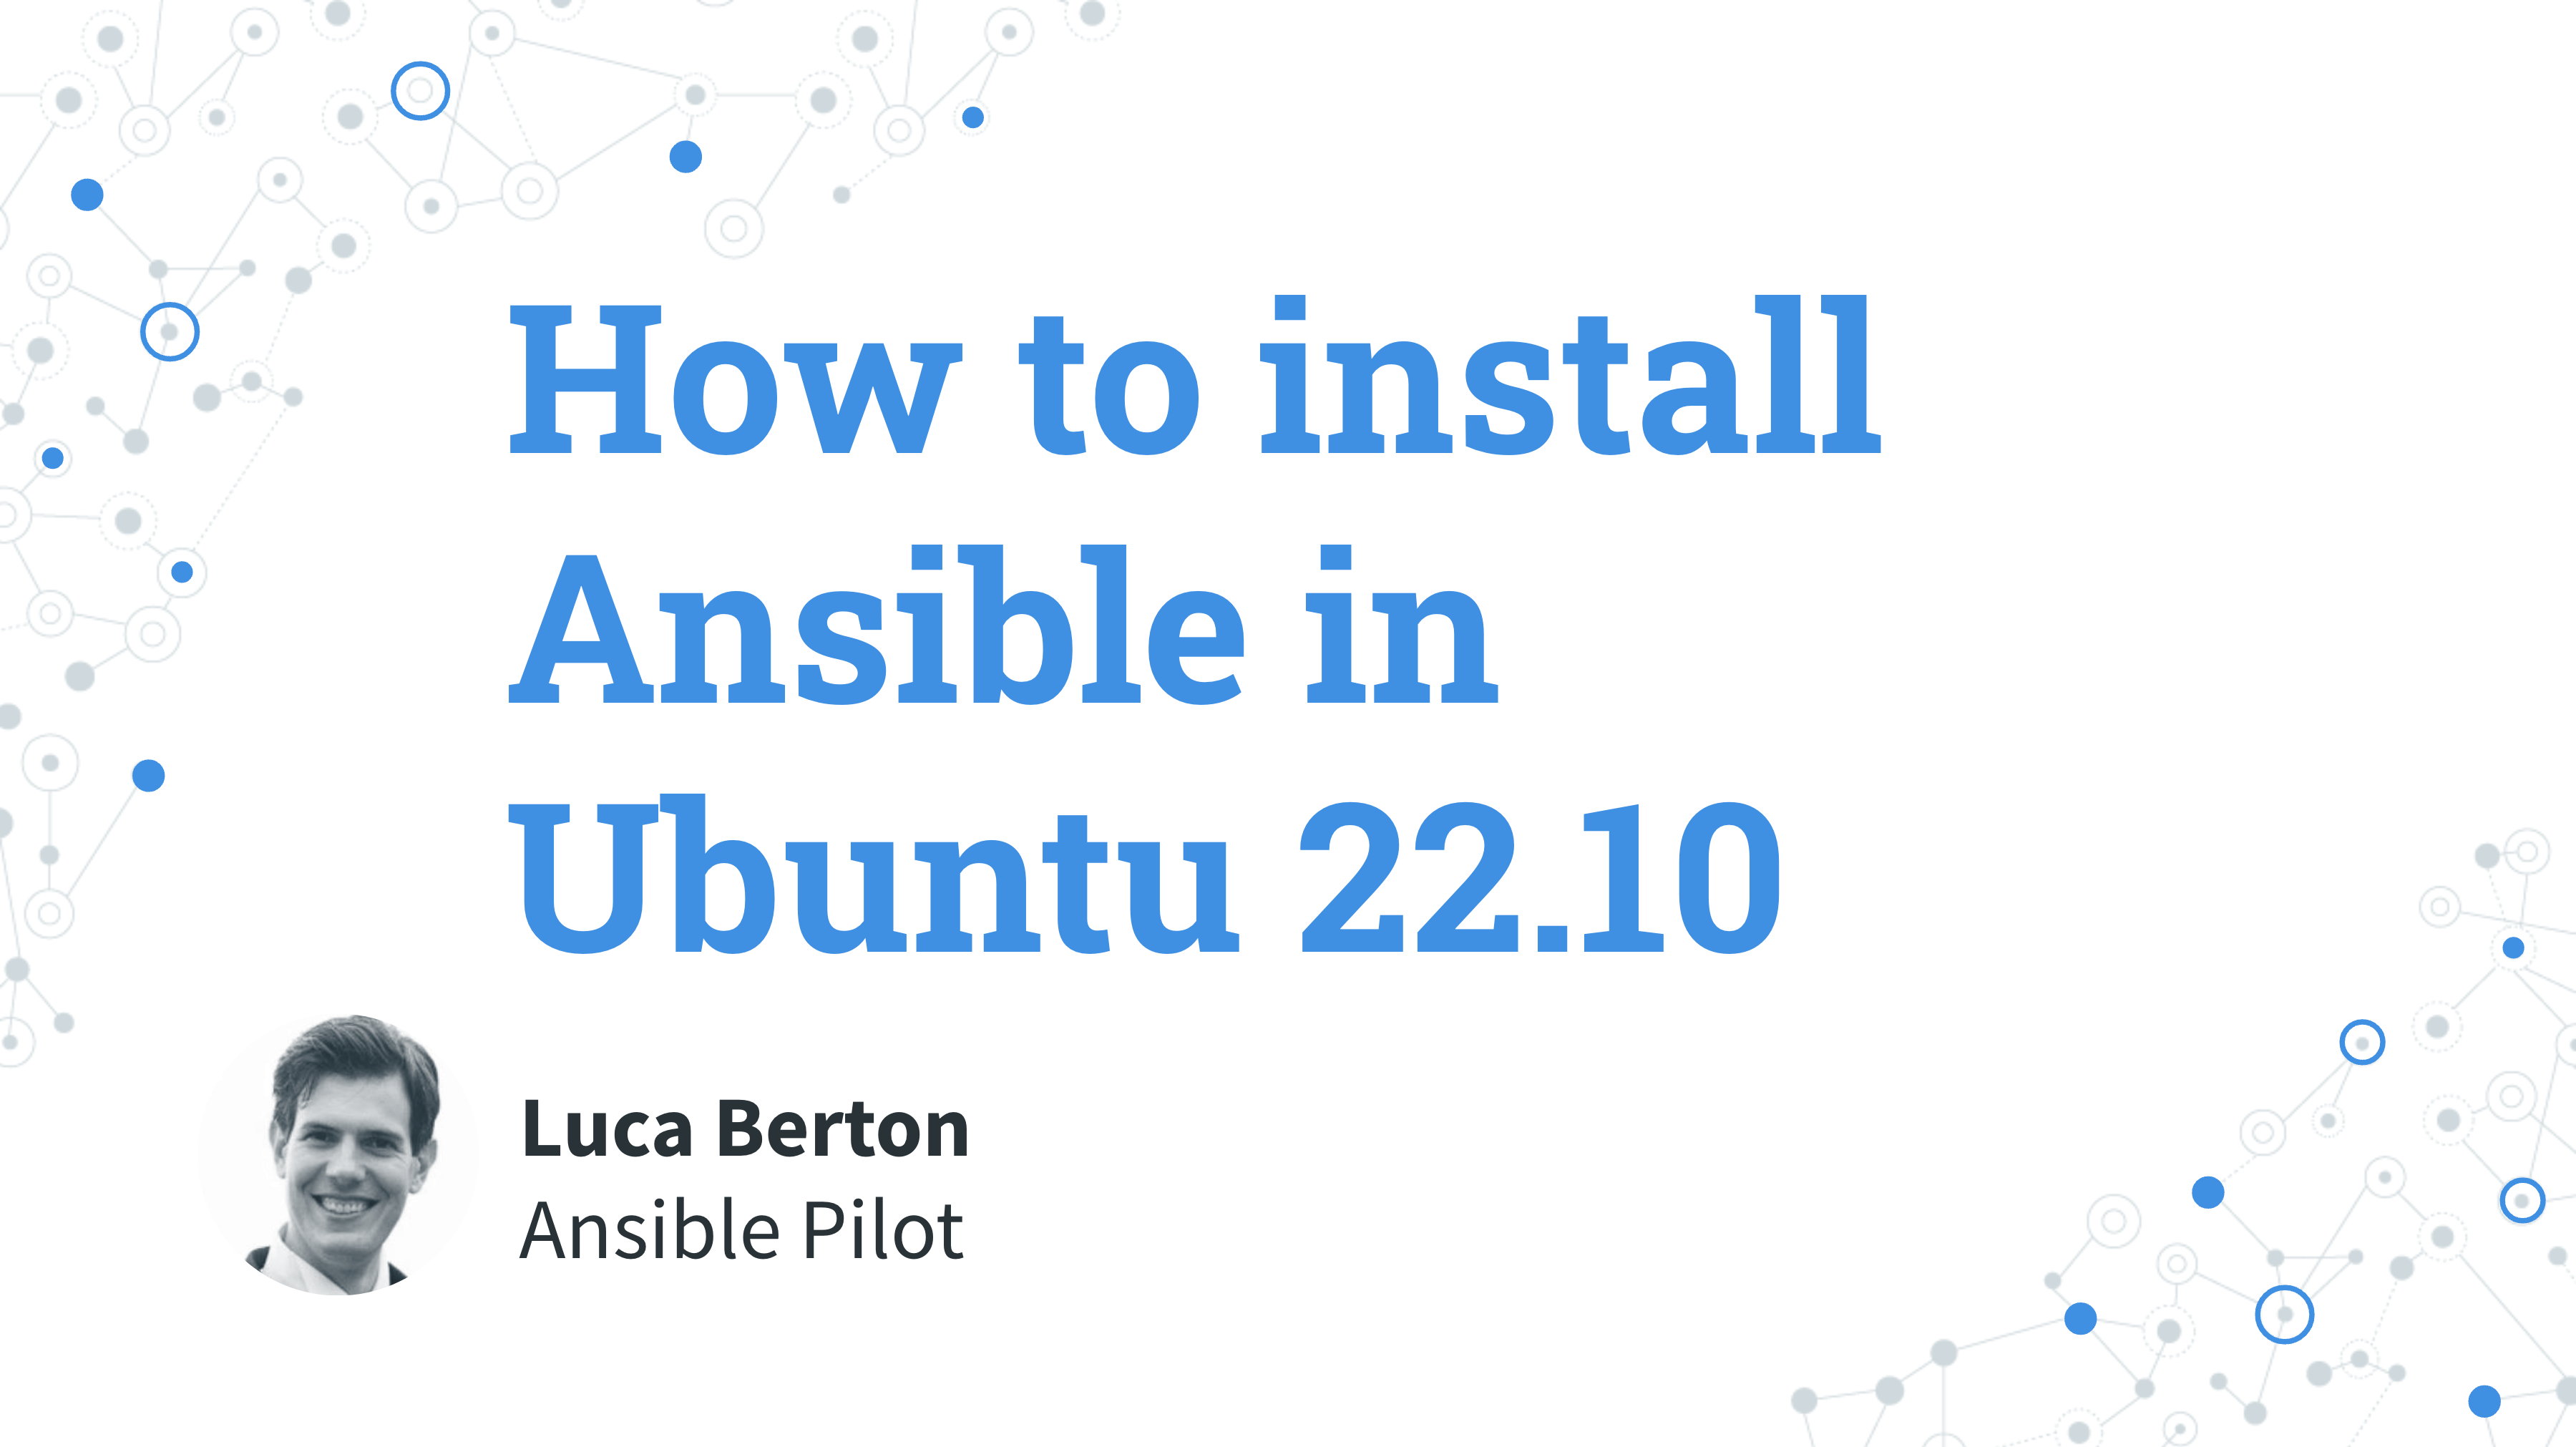 How to install Ansible in Ubuntu 22.10 Kinetic Kudu — Ansible Install